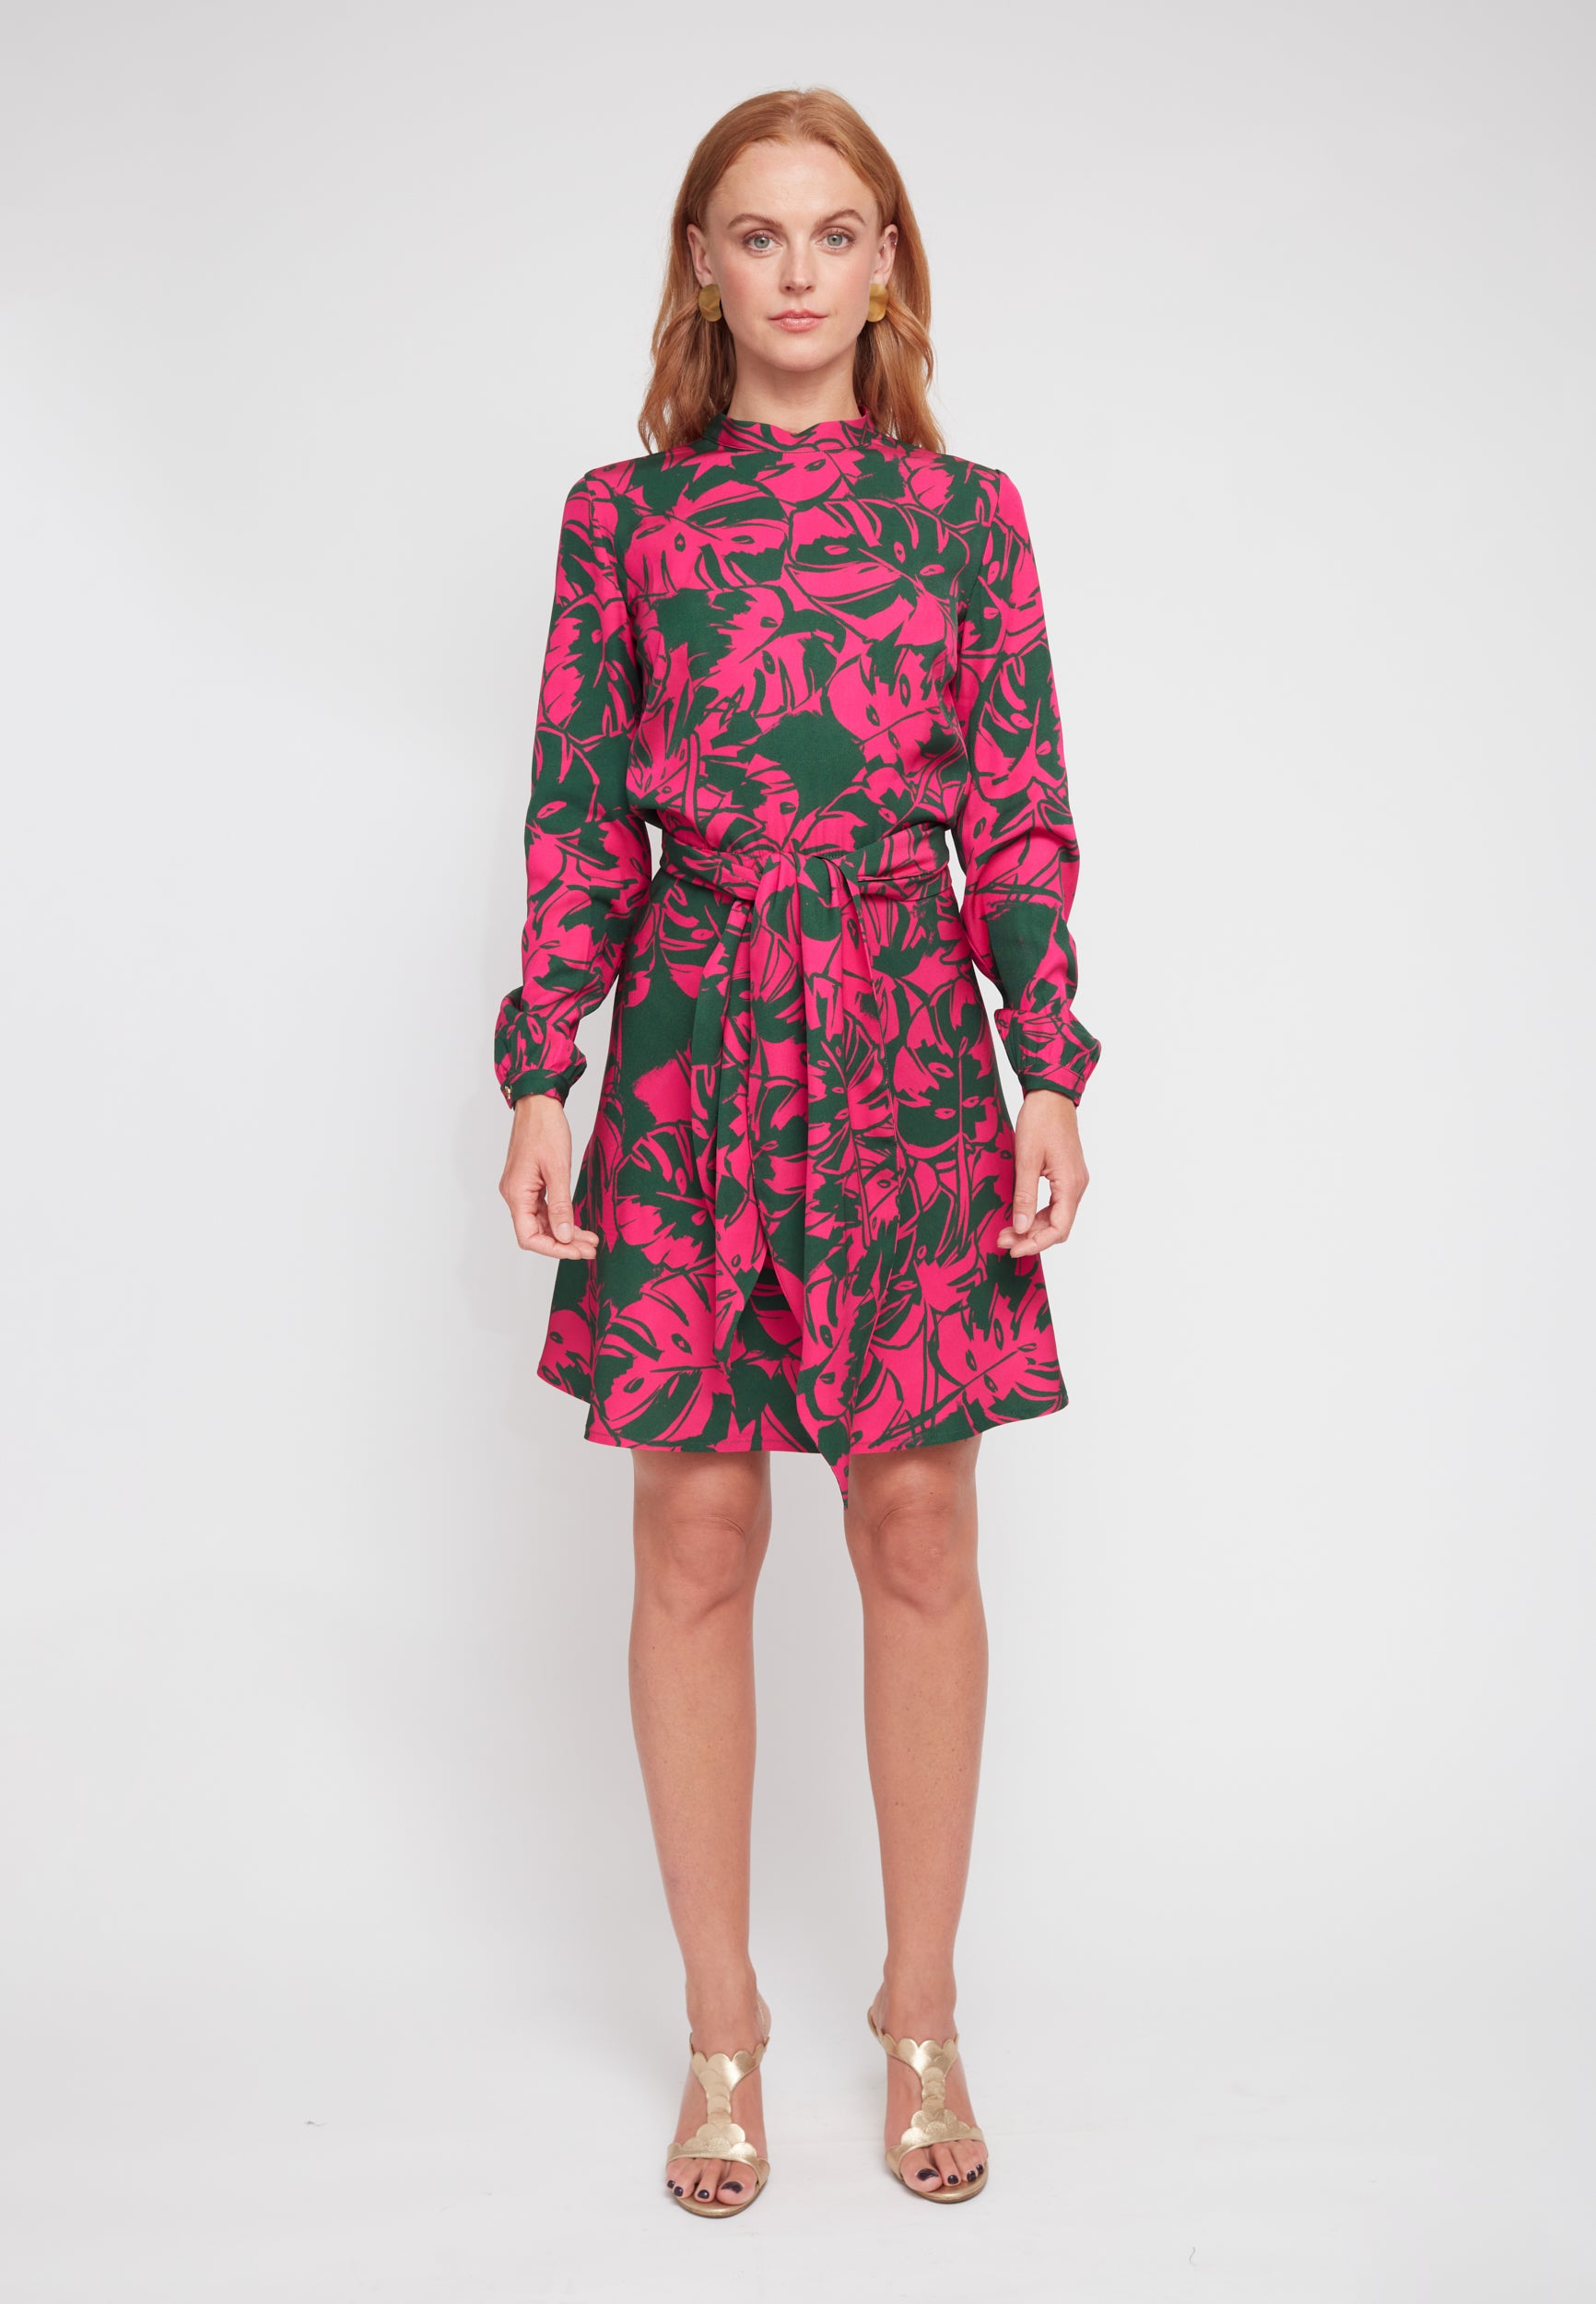 ADRIA floral print mini dress from recycled viscose